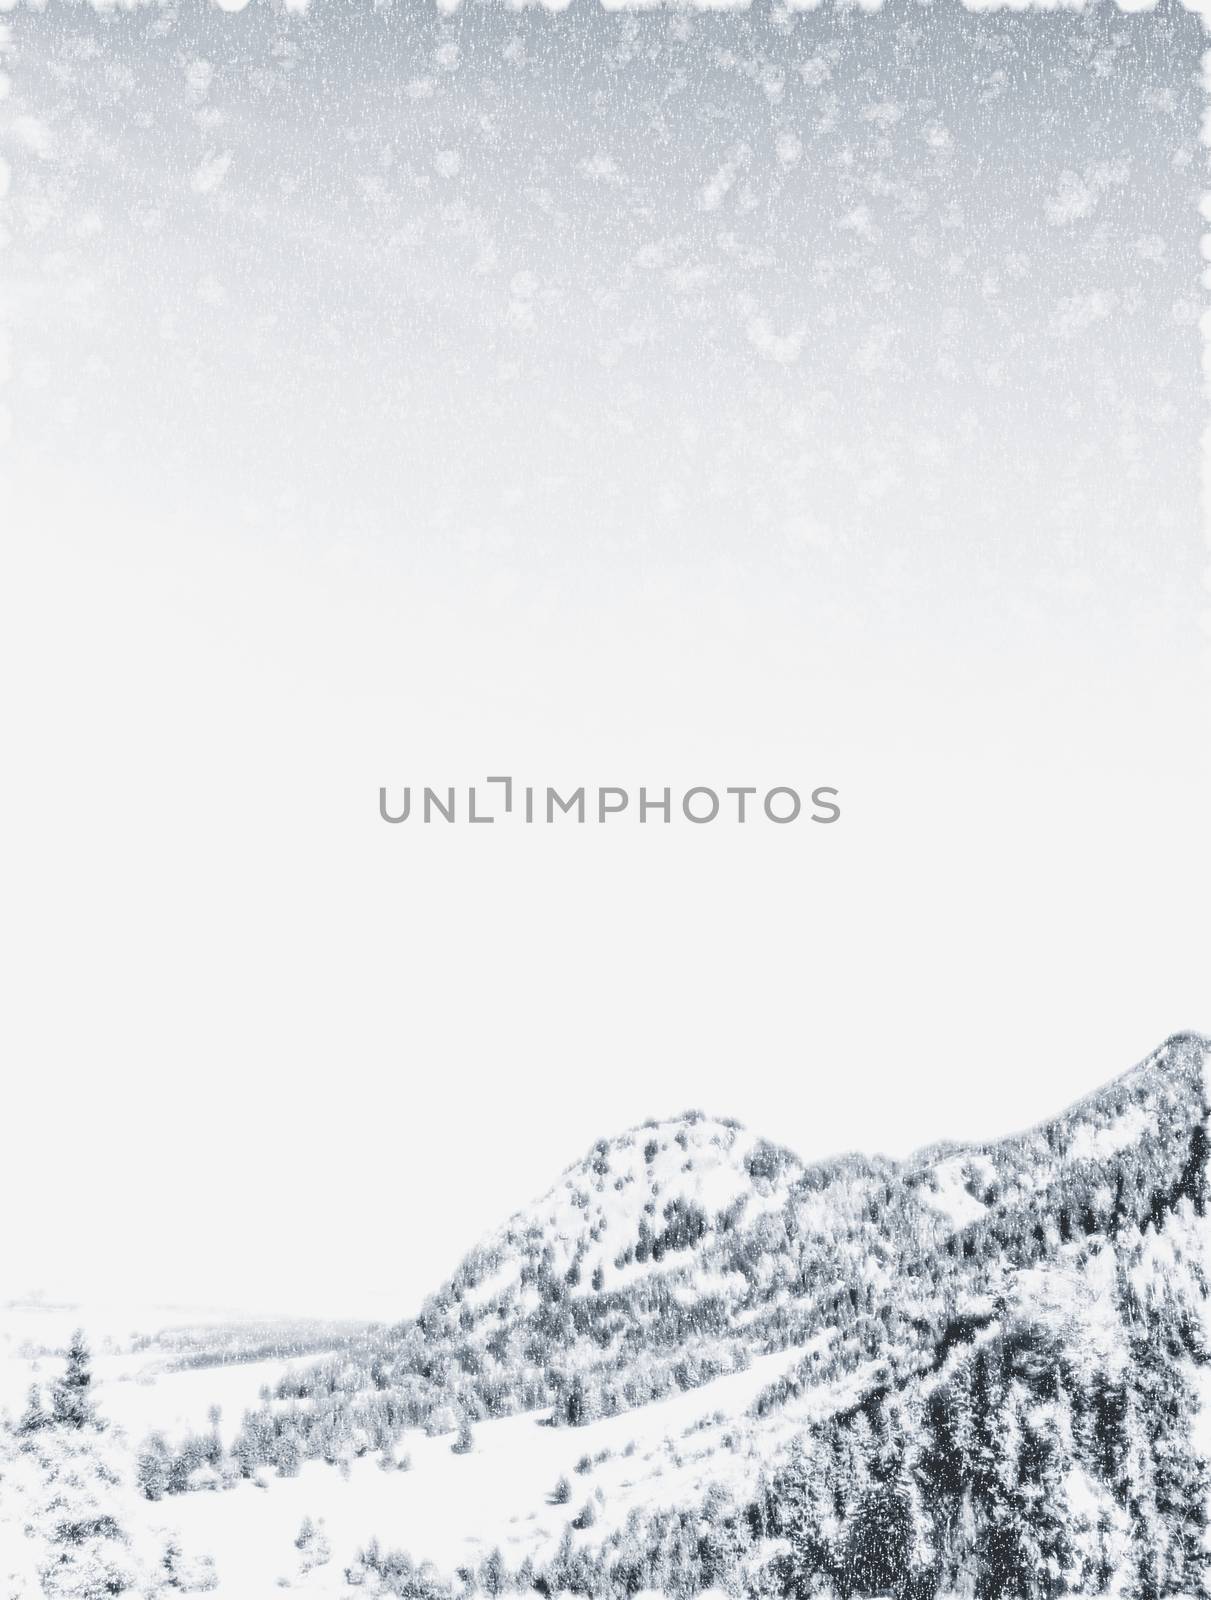 Christmas card with snowy mountains landscape in winter, monochr by Anneleven